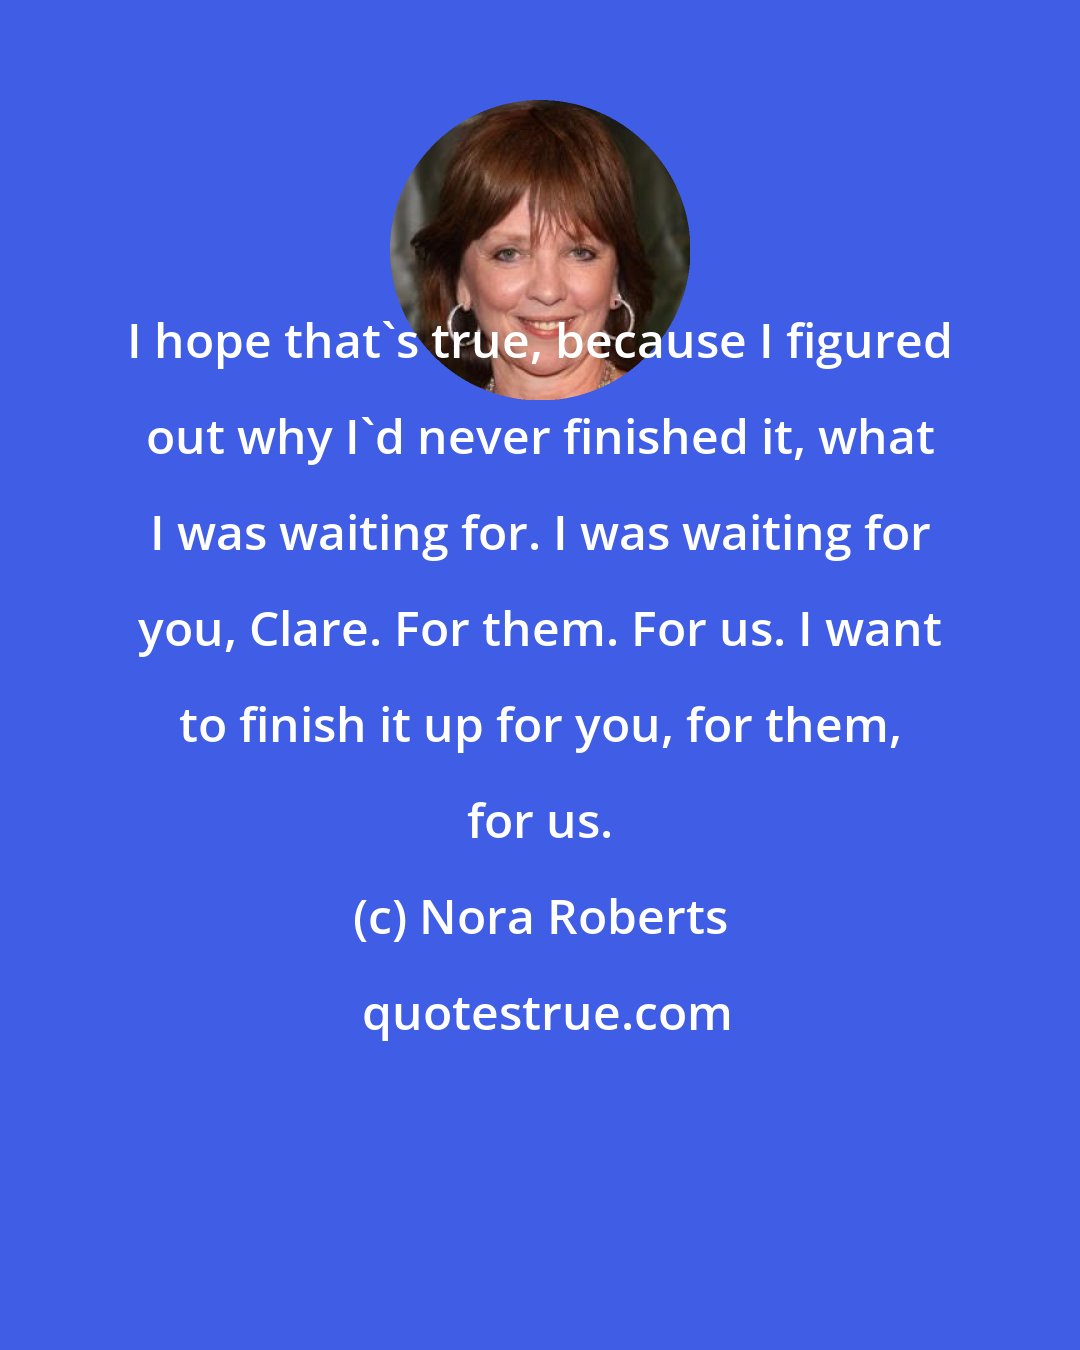 Nora Roberts: I hope that's true, because I figured out why I'd never finished it, what I was waiting for. I was waiting for you, Clare. For them. For us. I want to finish it up for you, for them, for us.